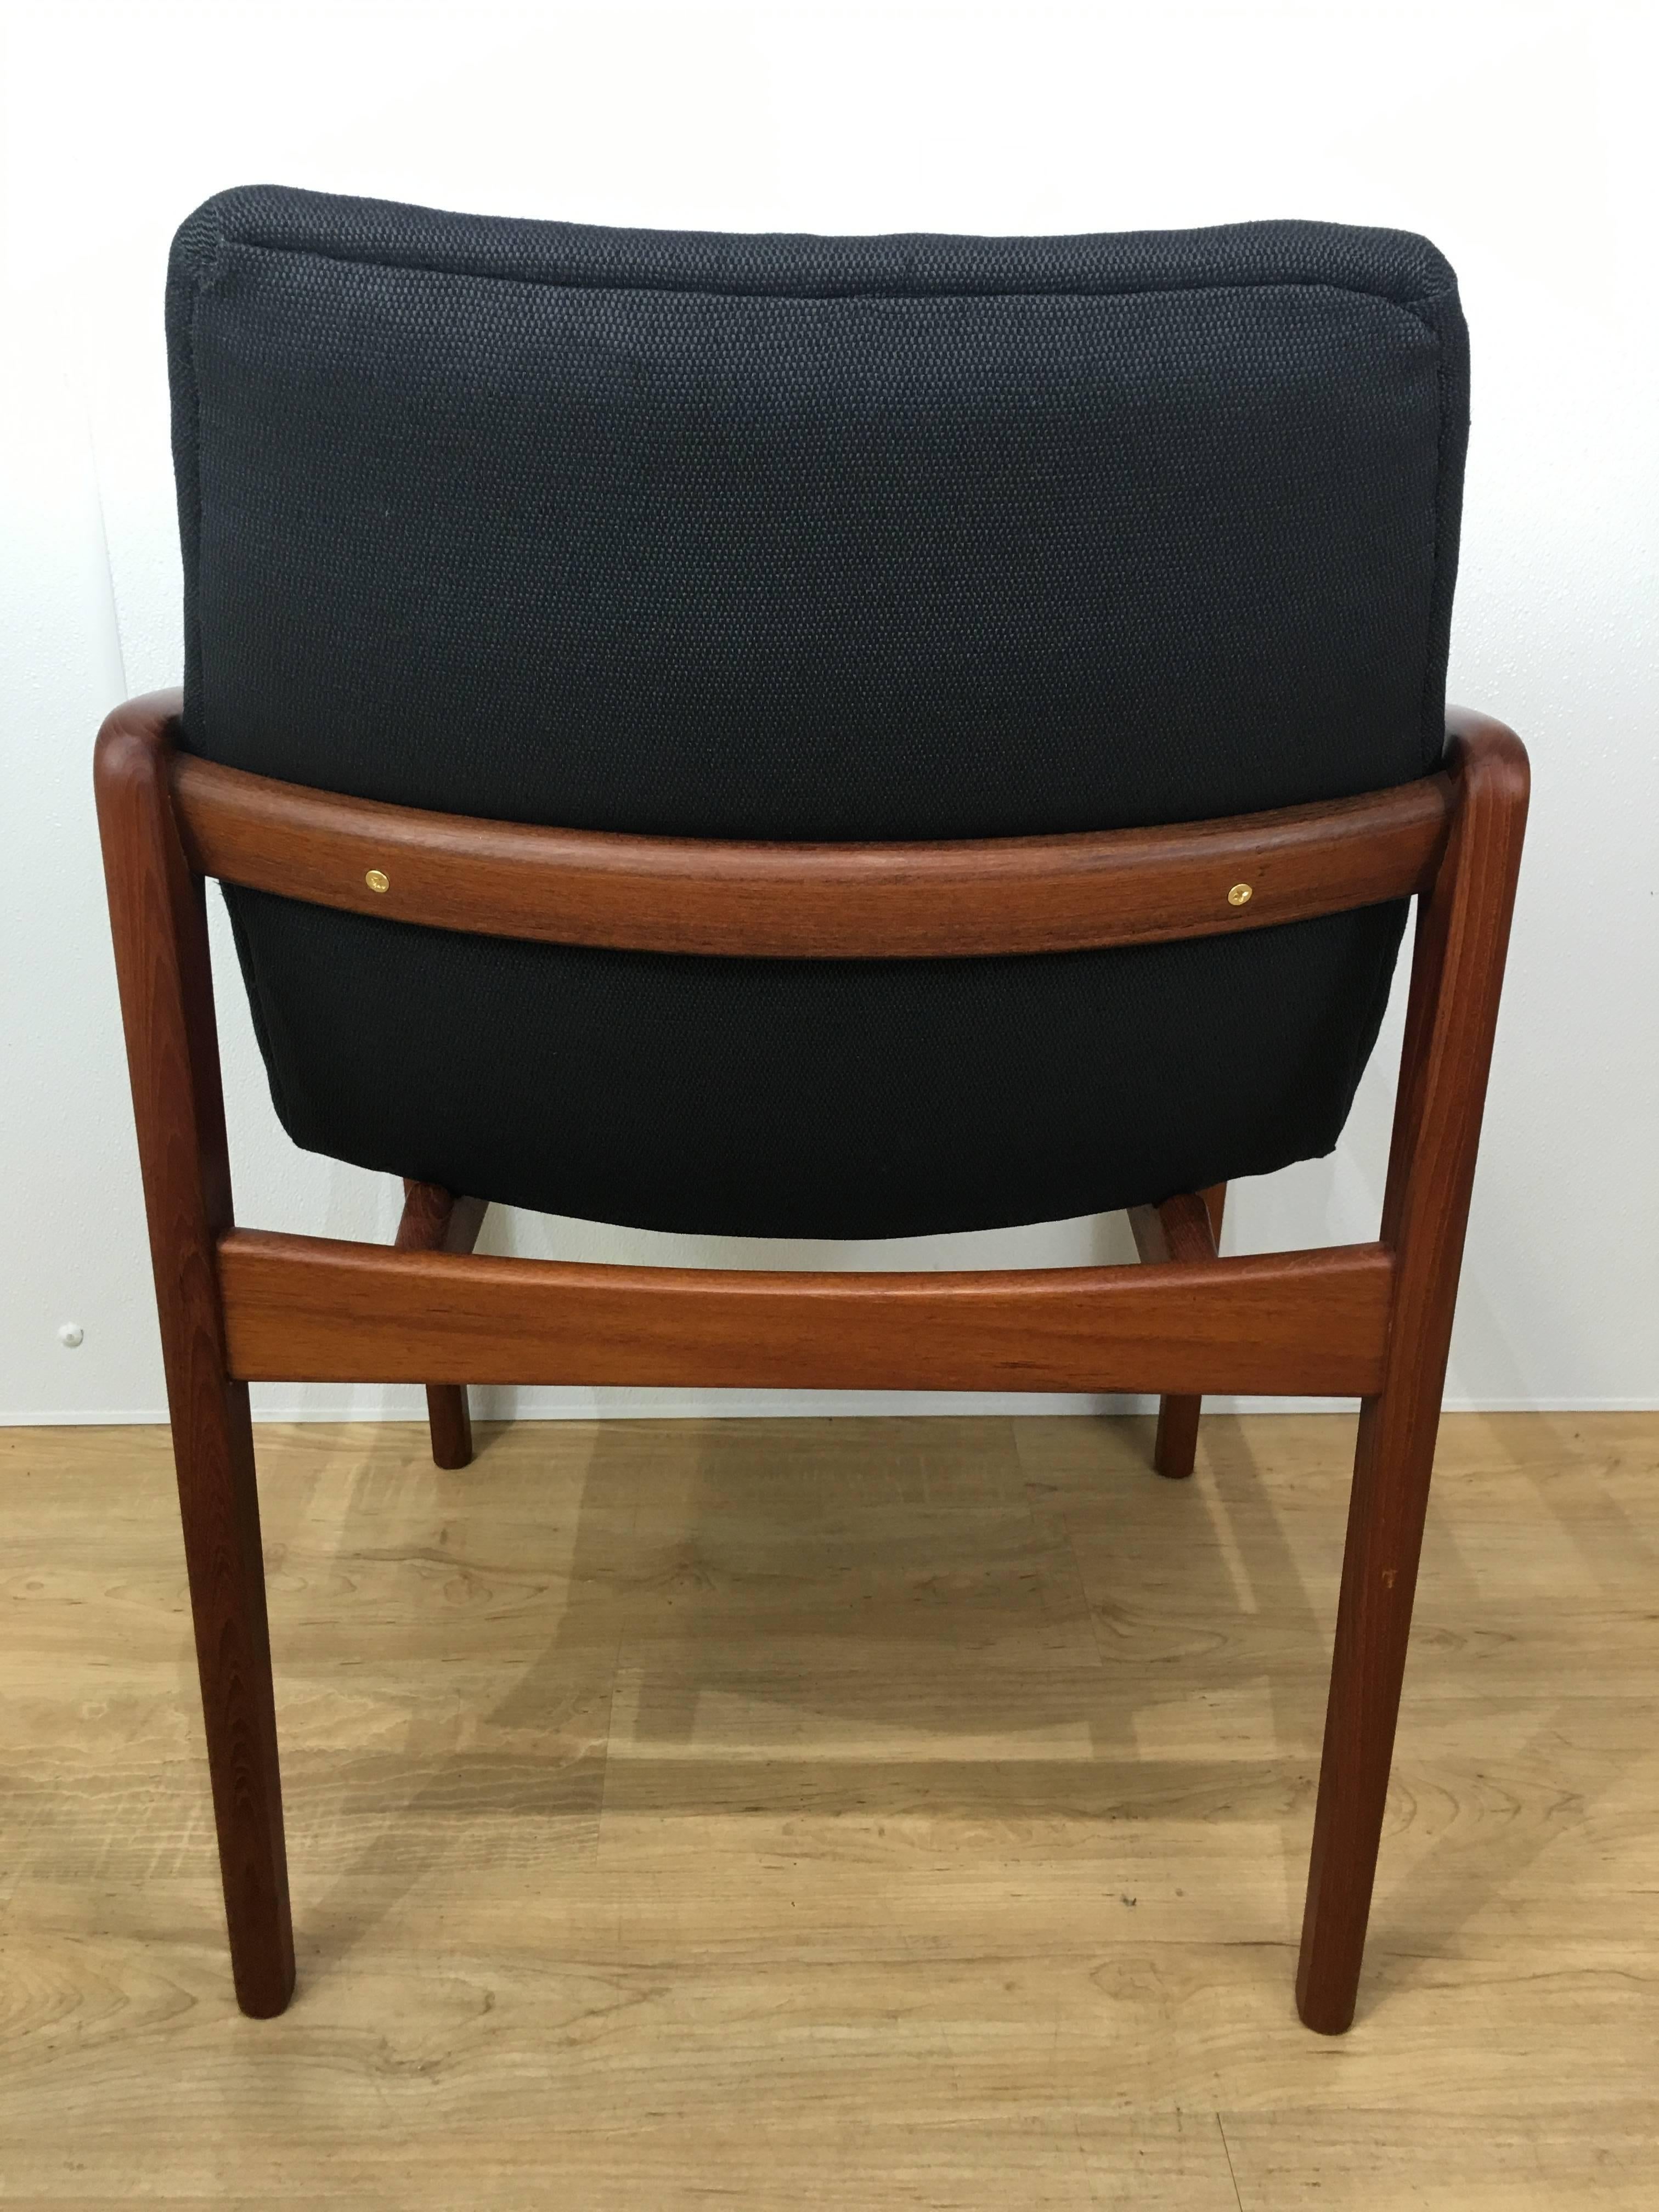 Six Danish Modern, Teak Cantilever Dining Chairs In Good Condition For Sale In Atlanta, GA